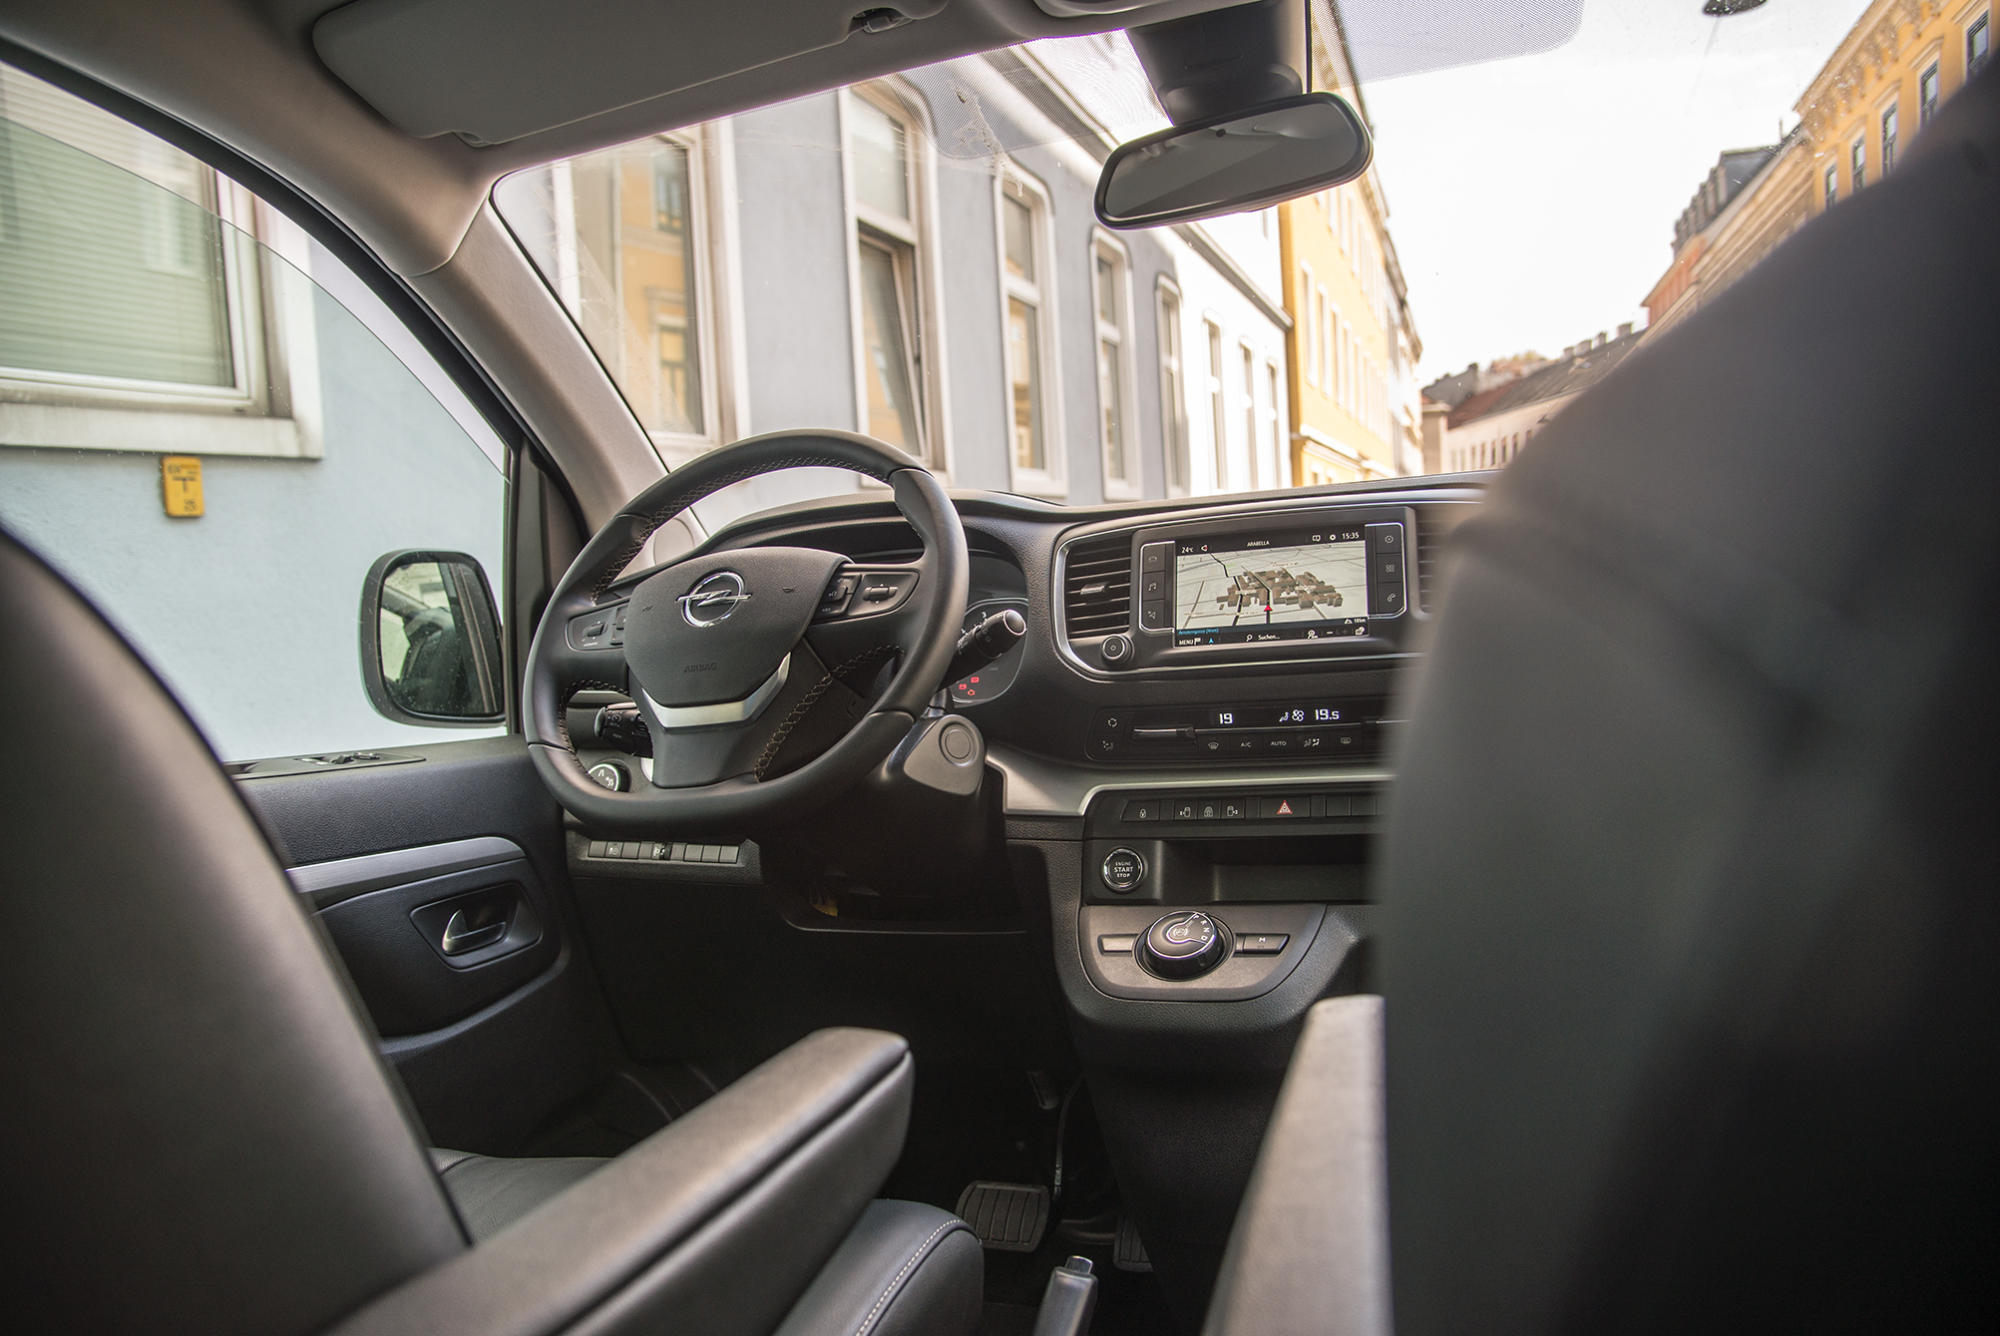 2020 Opel Zafira Life test review